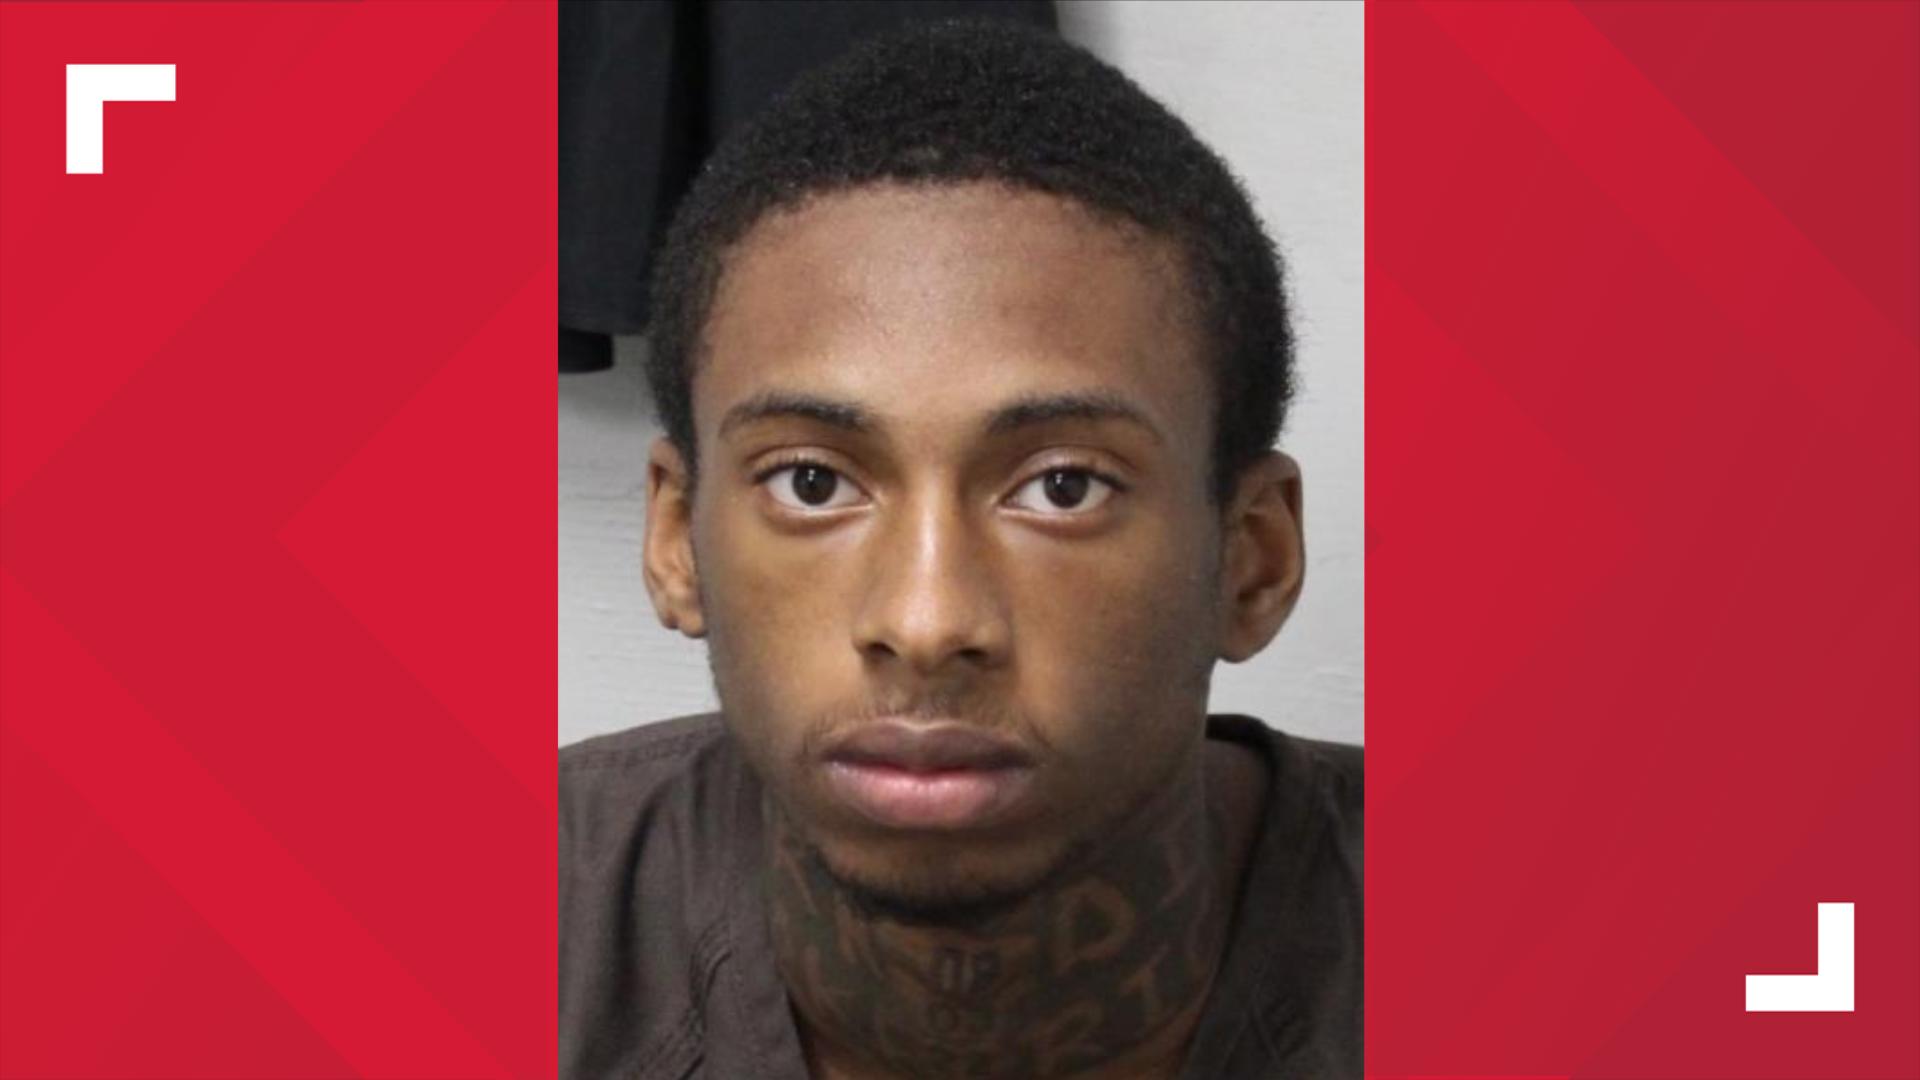 Shane Payne Jr., 17, faces charges of two counts of second-degree murder and conspiracy to commit murder related to the killings in August 2022.